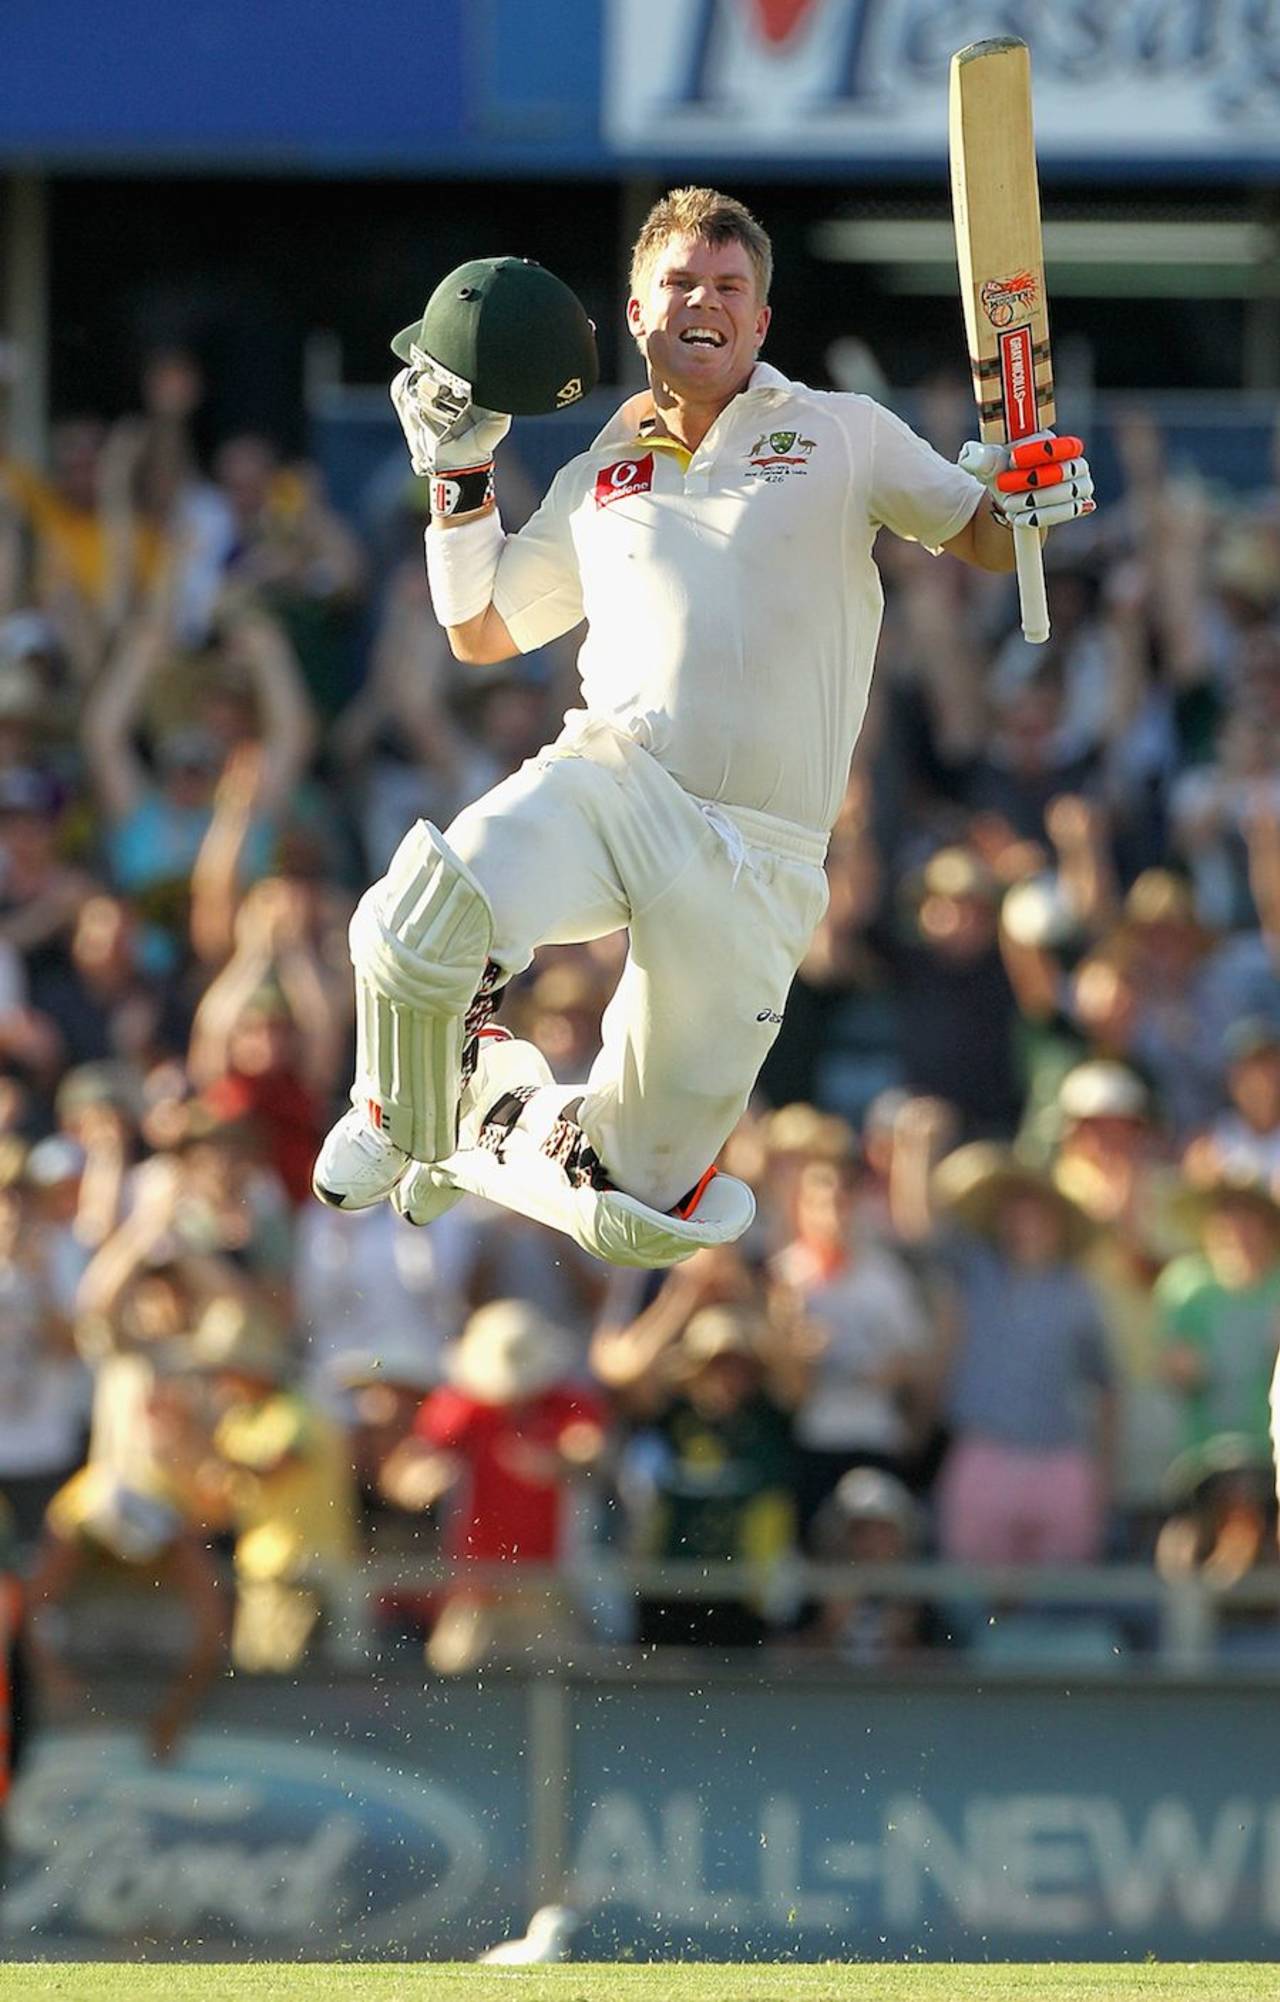 David Warner takes off after reaching his century with a six off his 69th ball, Australia v India, 3rd Test, Perth, 1st day, January 13, 2012